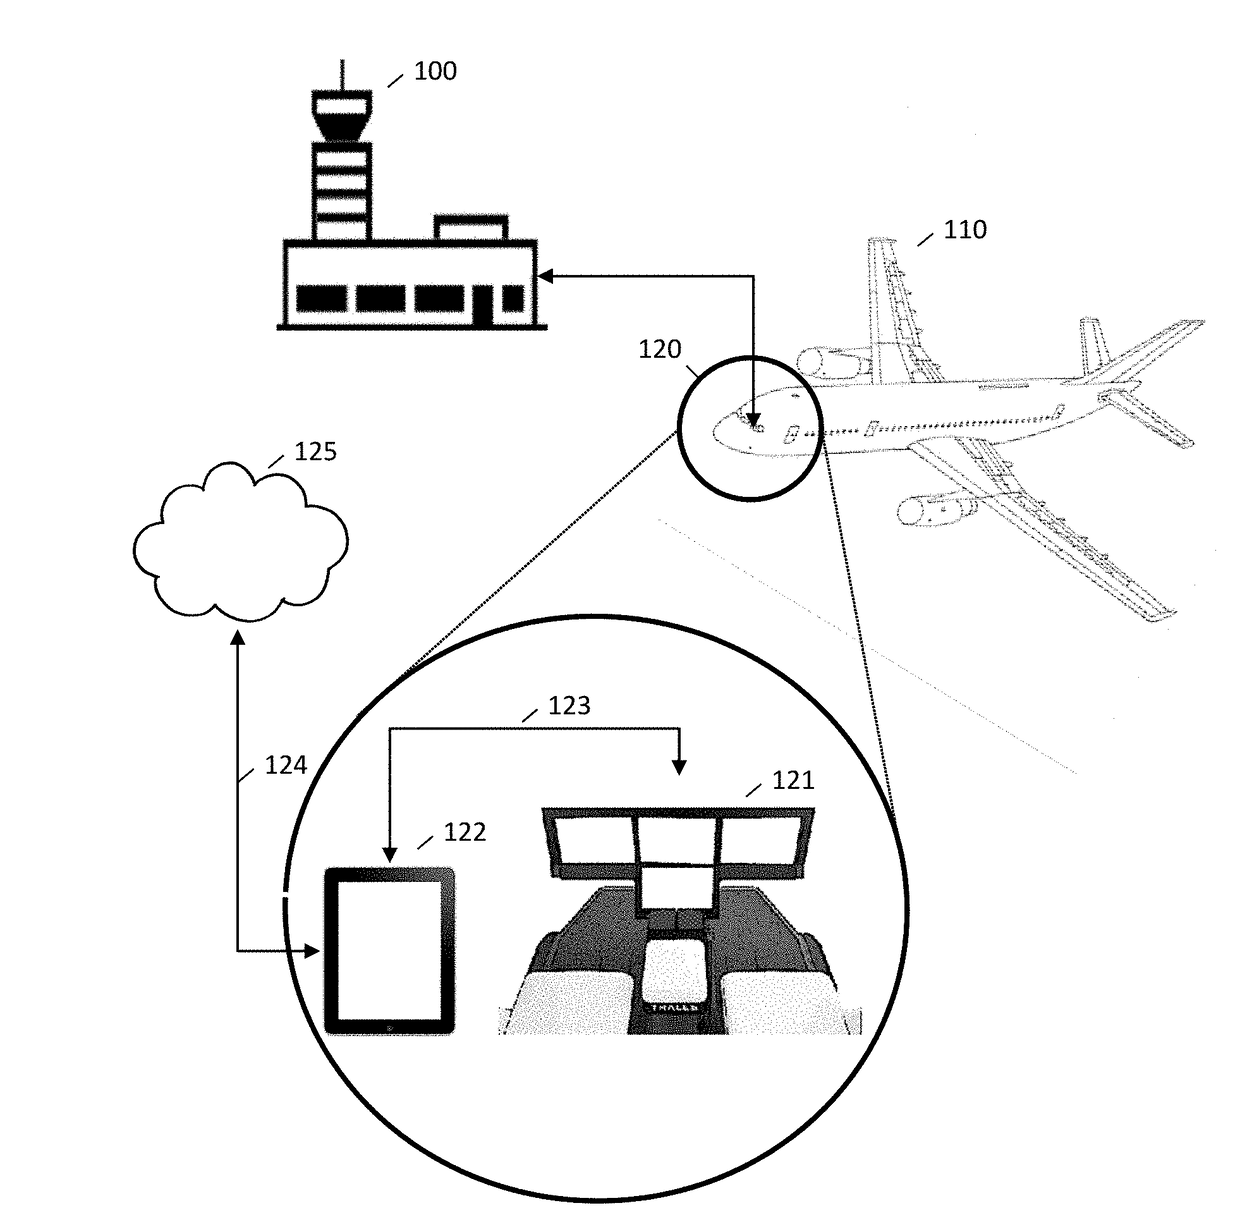 Open architecture for flight management system